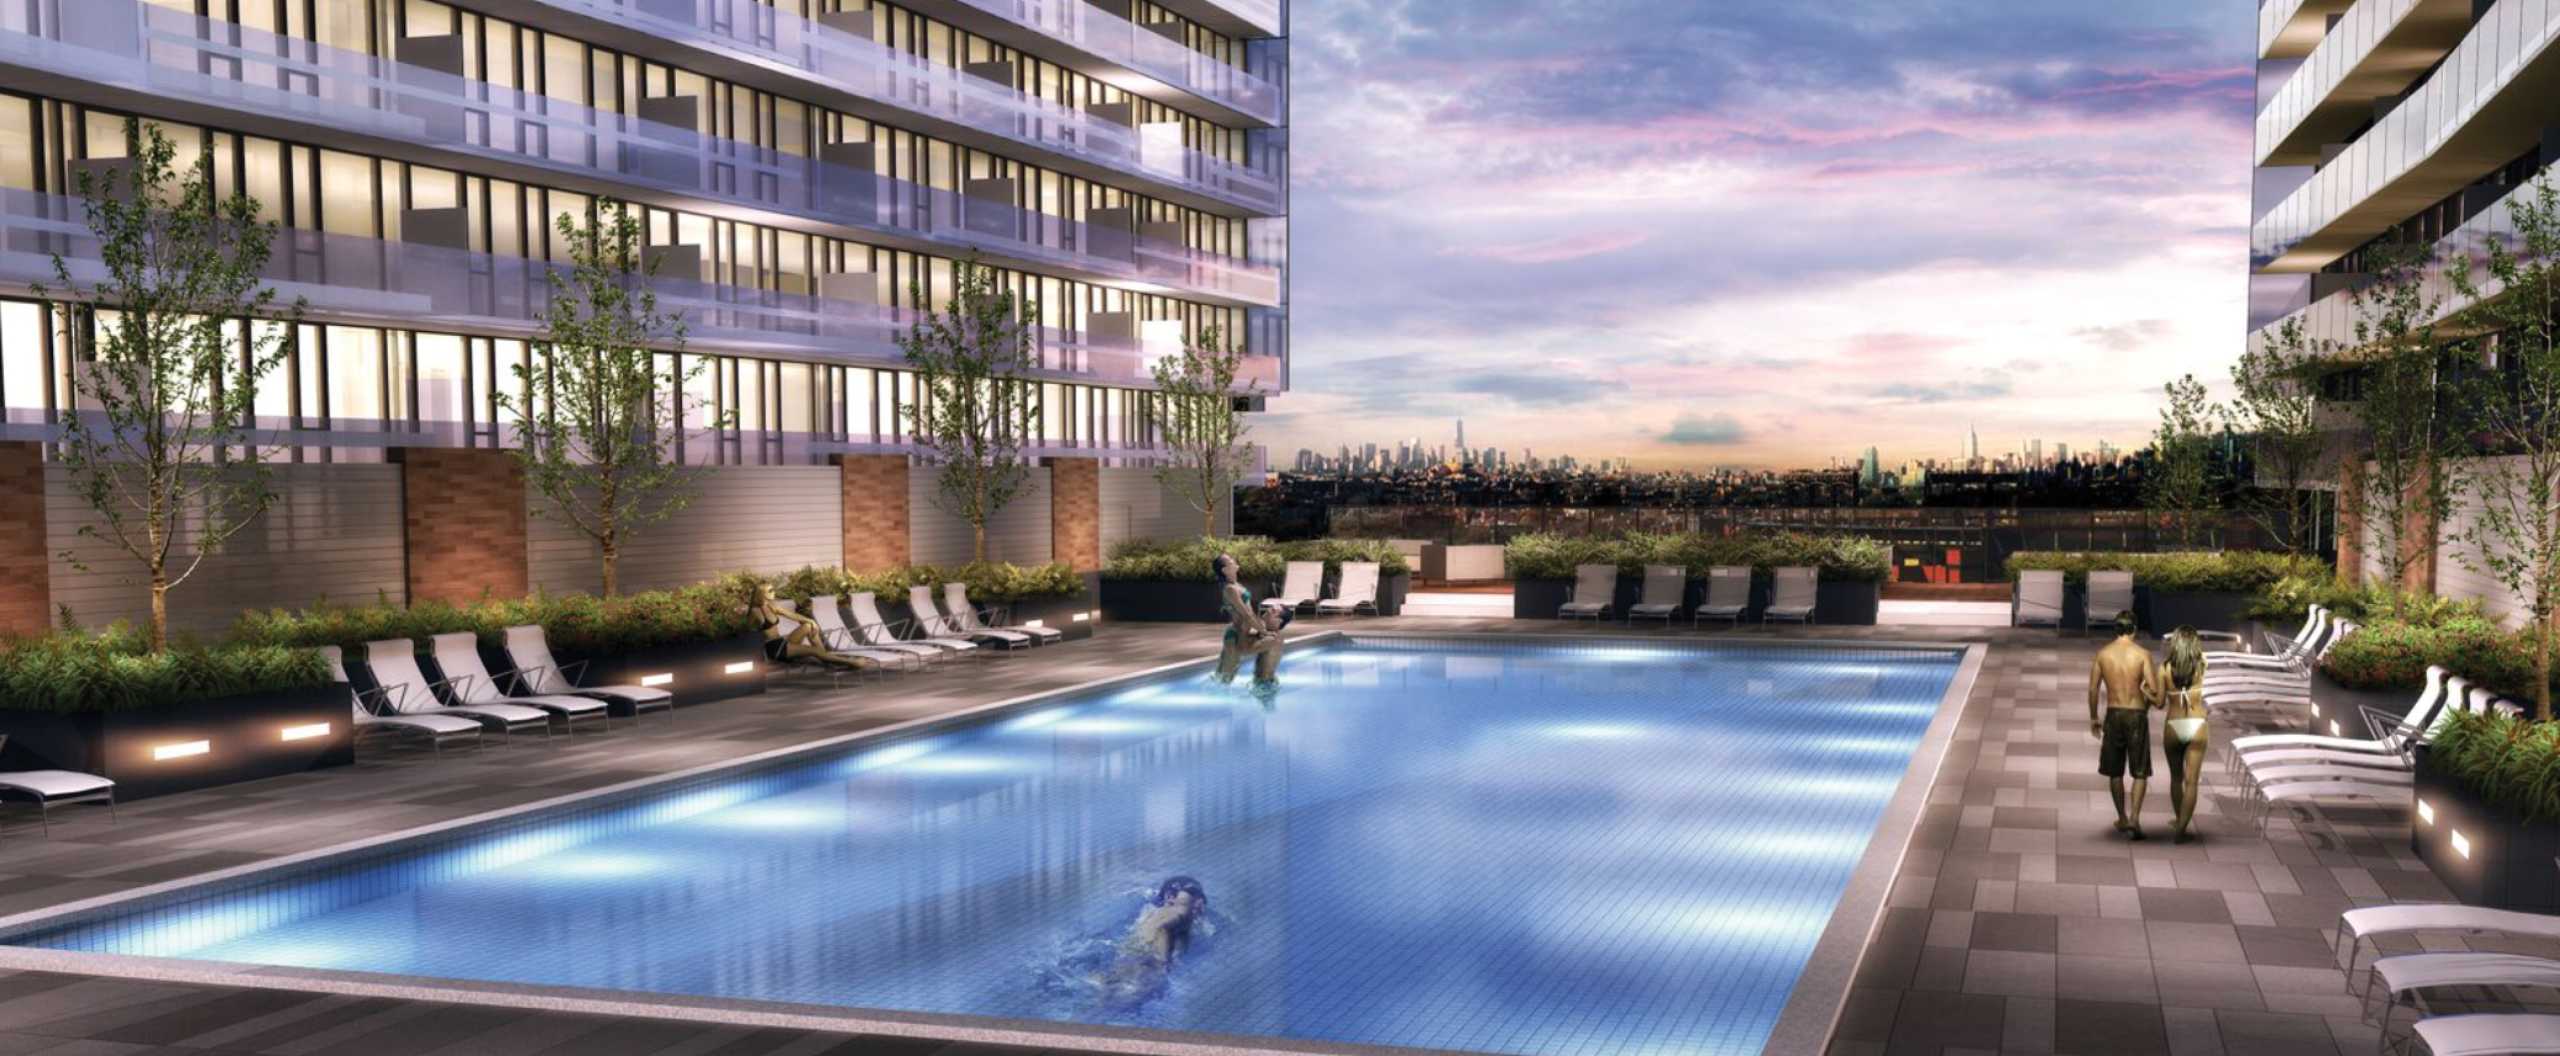 The Grand at Sky View Parc, rendering via Onex Real Estate Partners